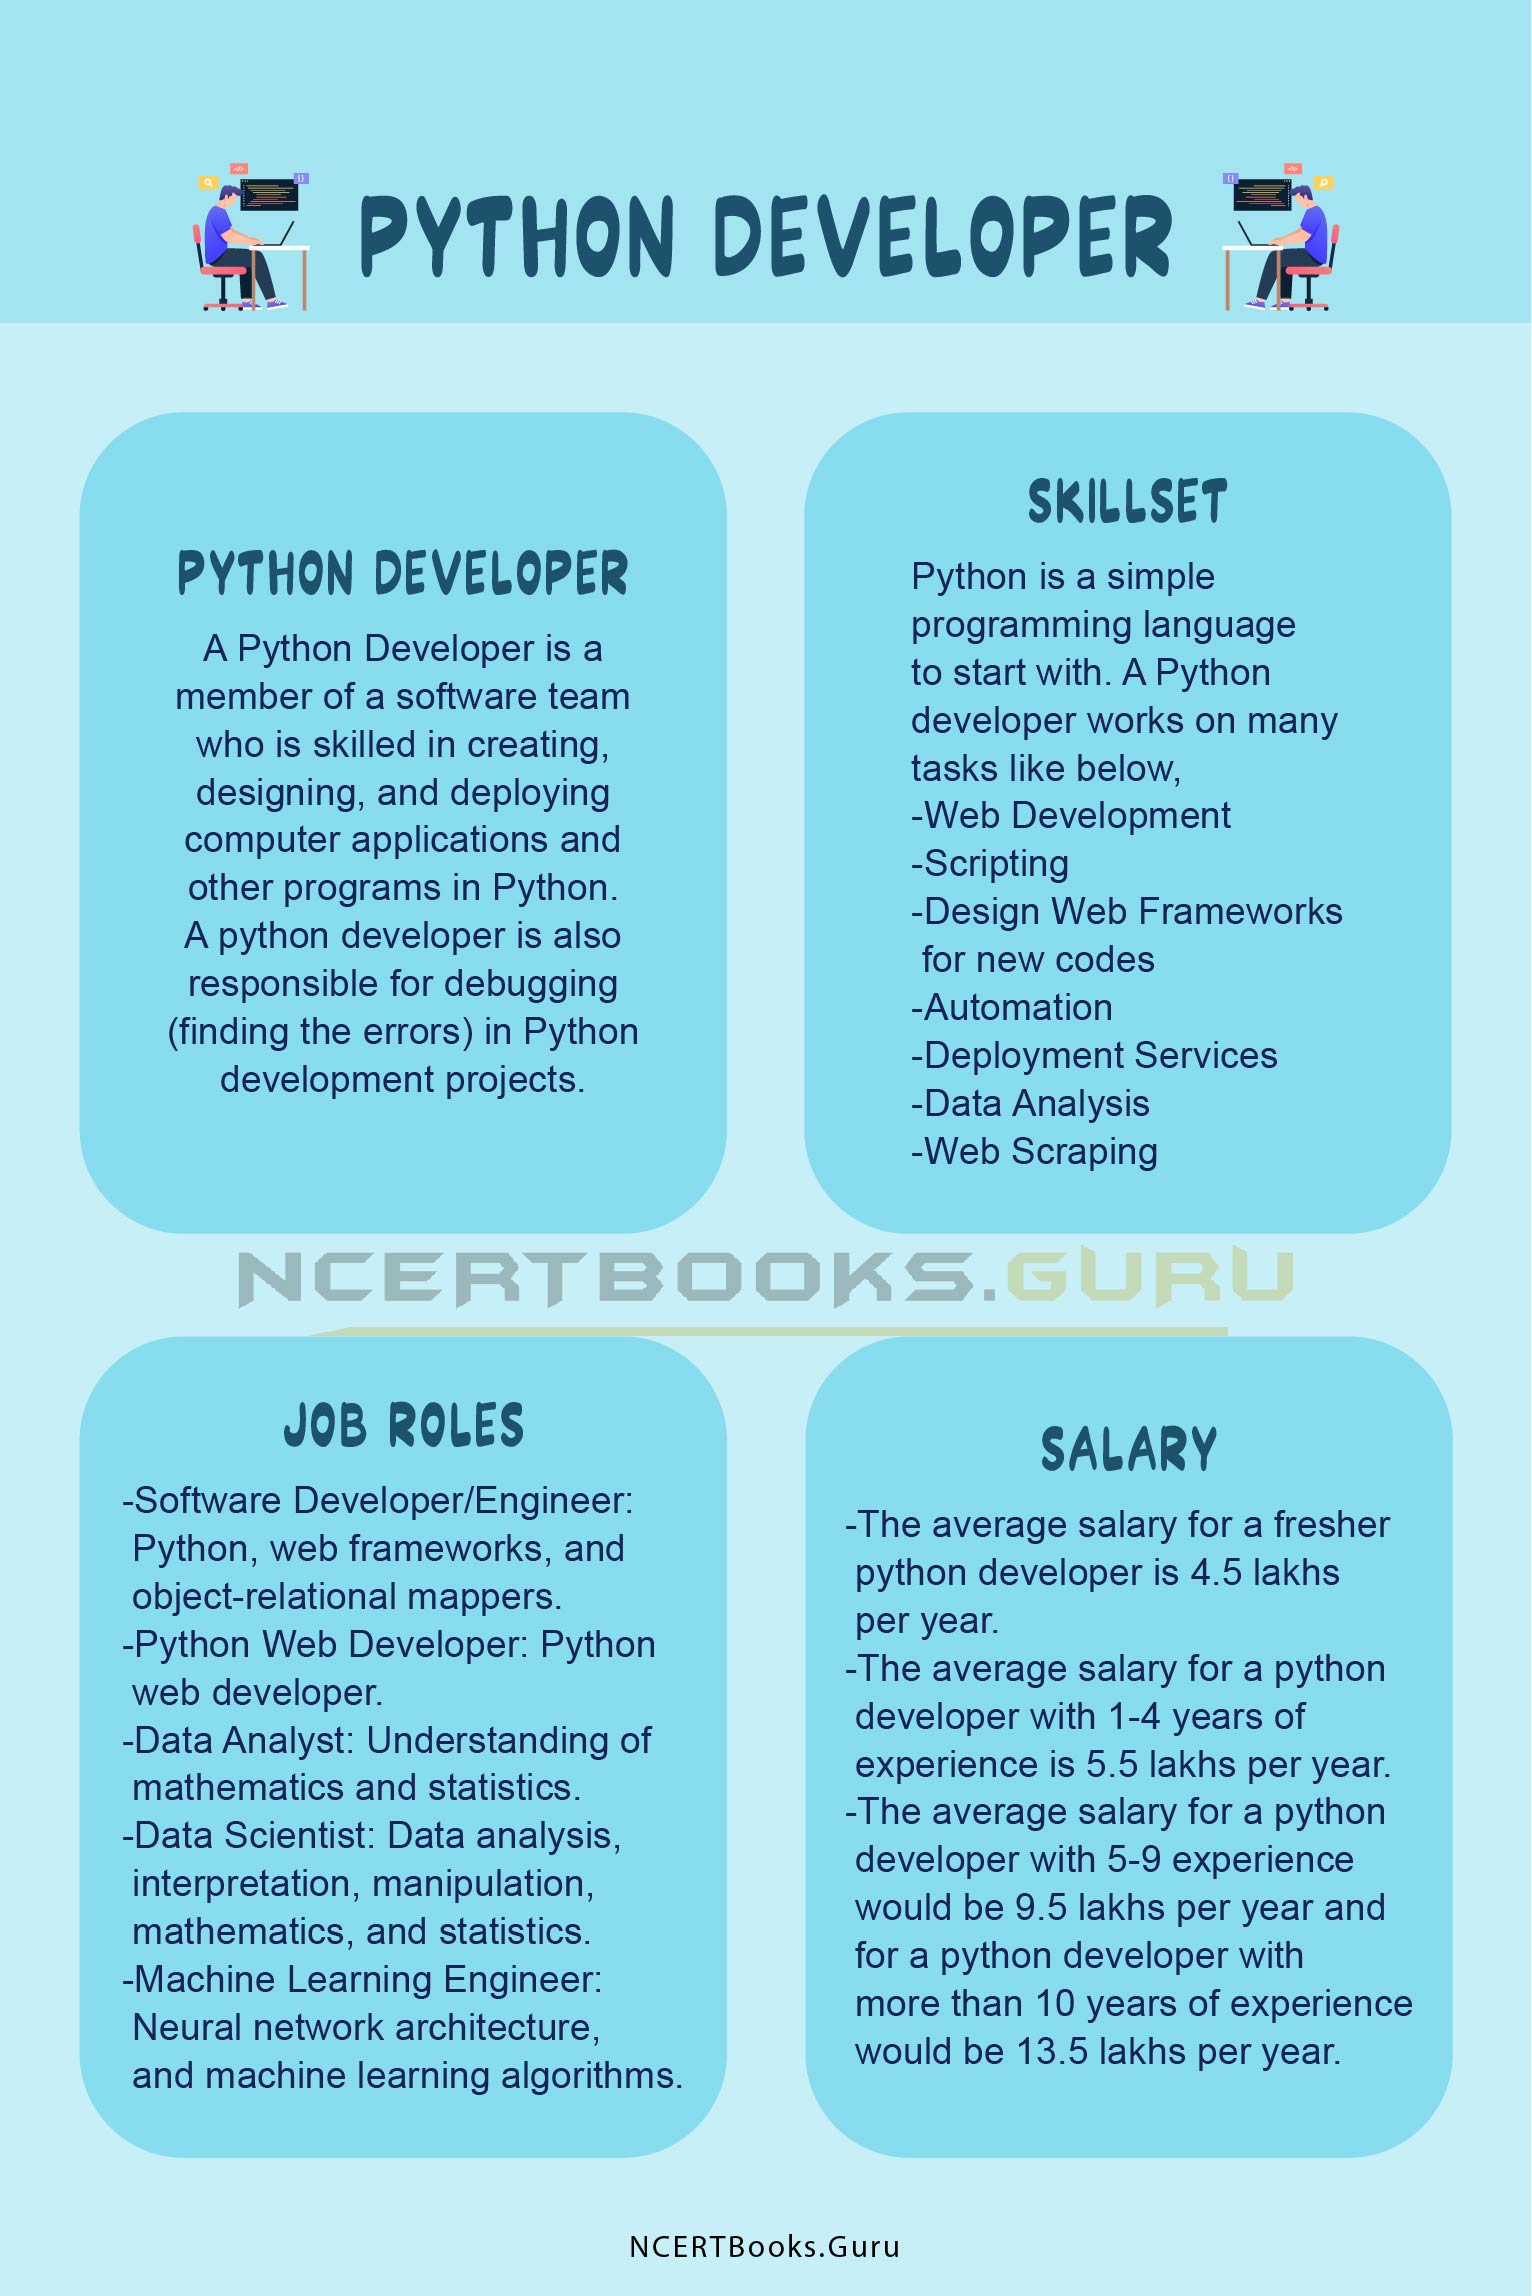 How to become a Python Developer in India